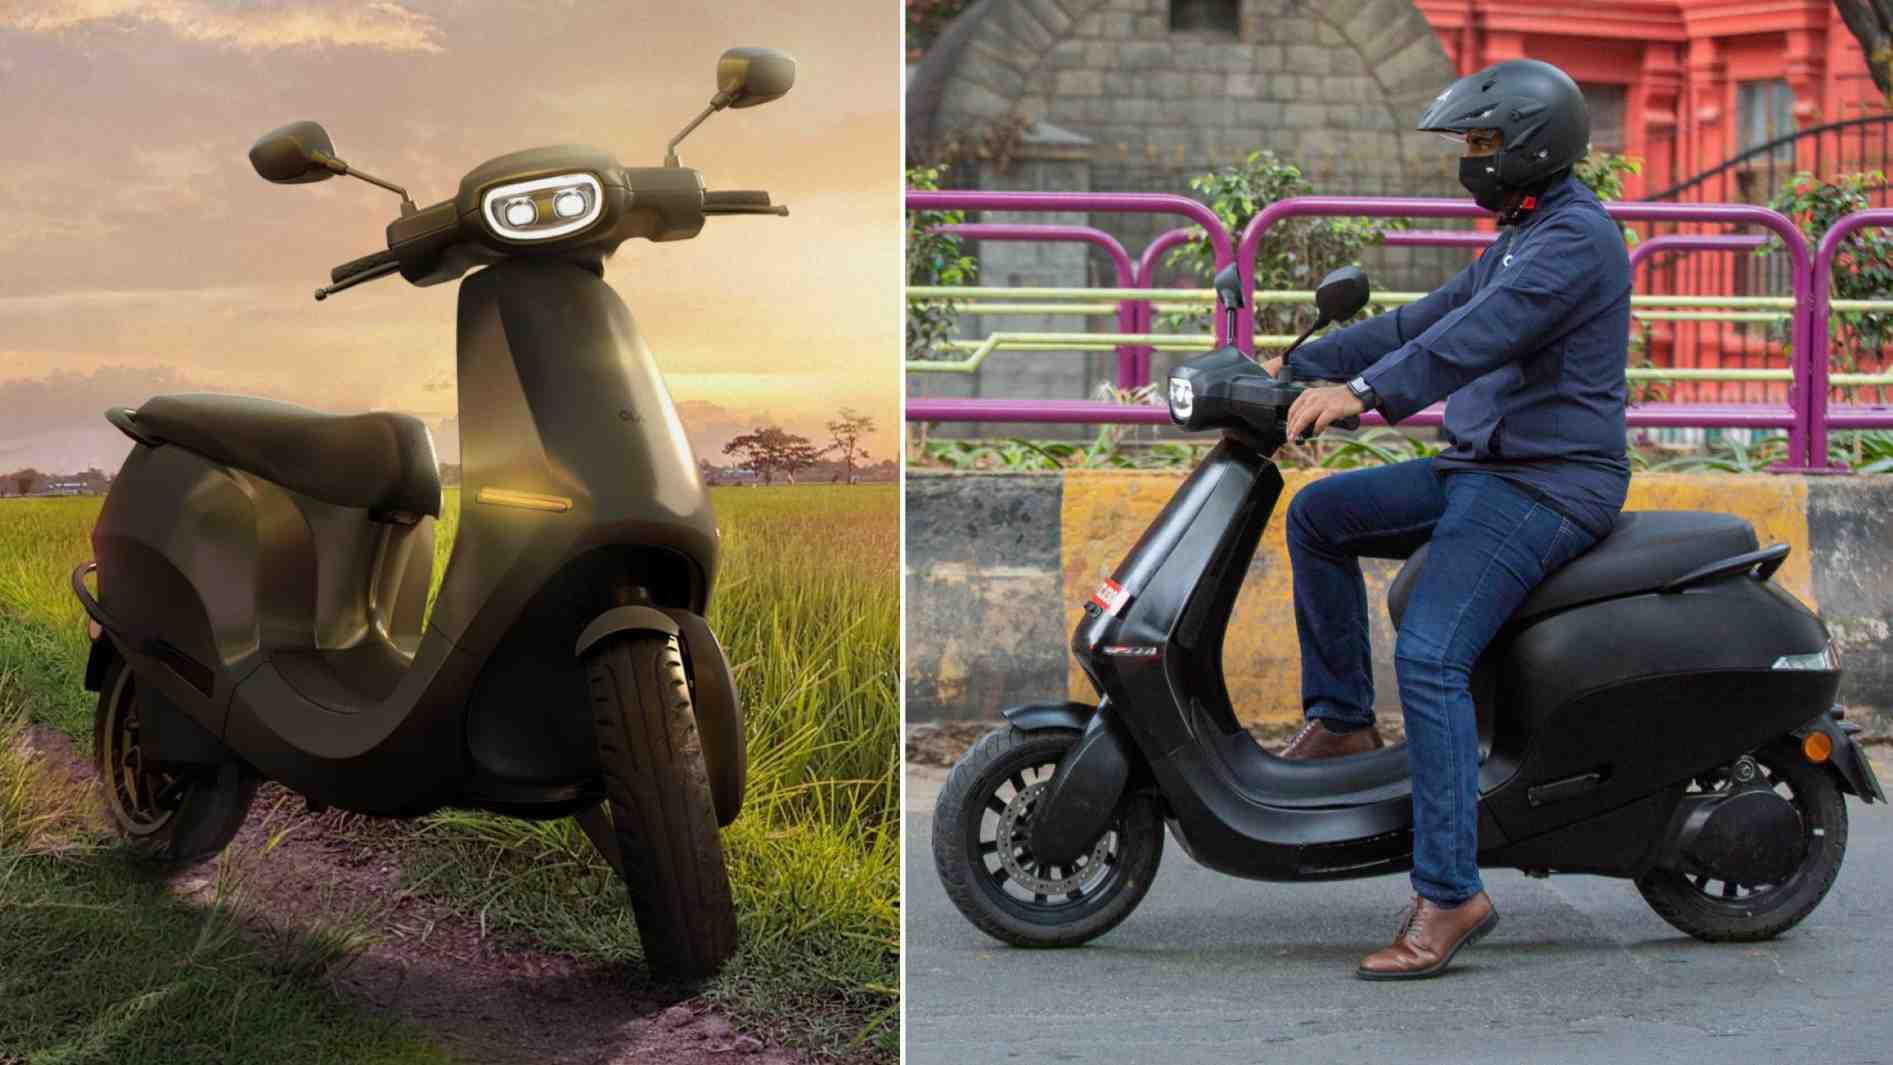 The Ola electric scooter is said to have class-leading acceleration and range figures. Image: Ola Electric/Tech2